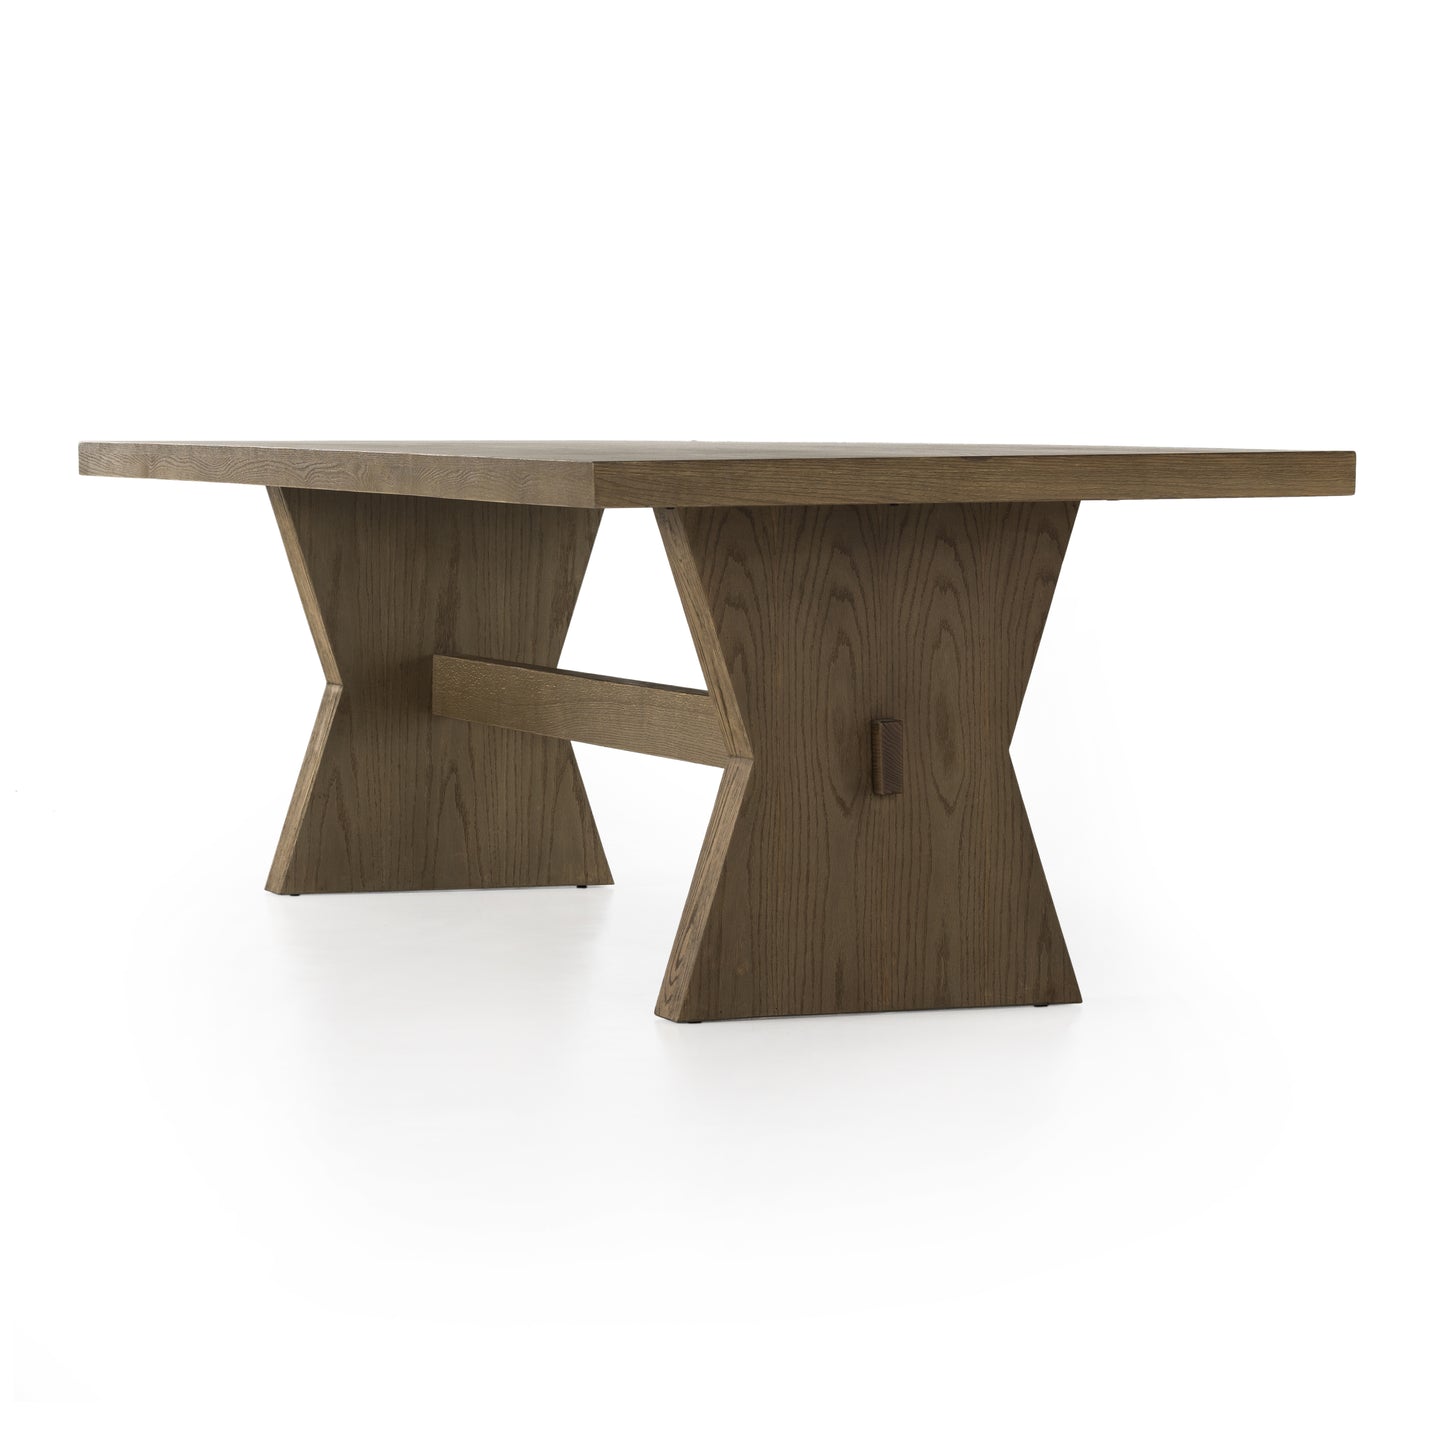 Tia Dining Table Dining Table Four Hands     Four Hands, Mid Century Modern Furniture, Old Bones Furniture Company, Old Bones Co, Modern Mid Century, Designer Furniture, https://www.oldbonesco.com/